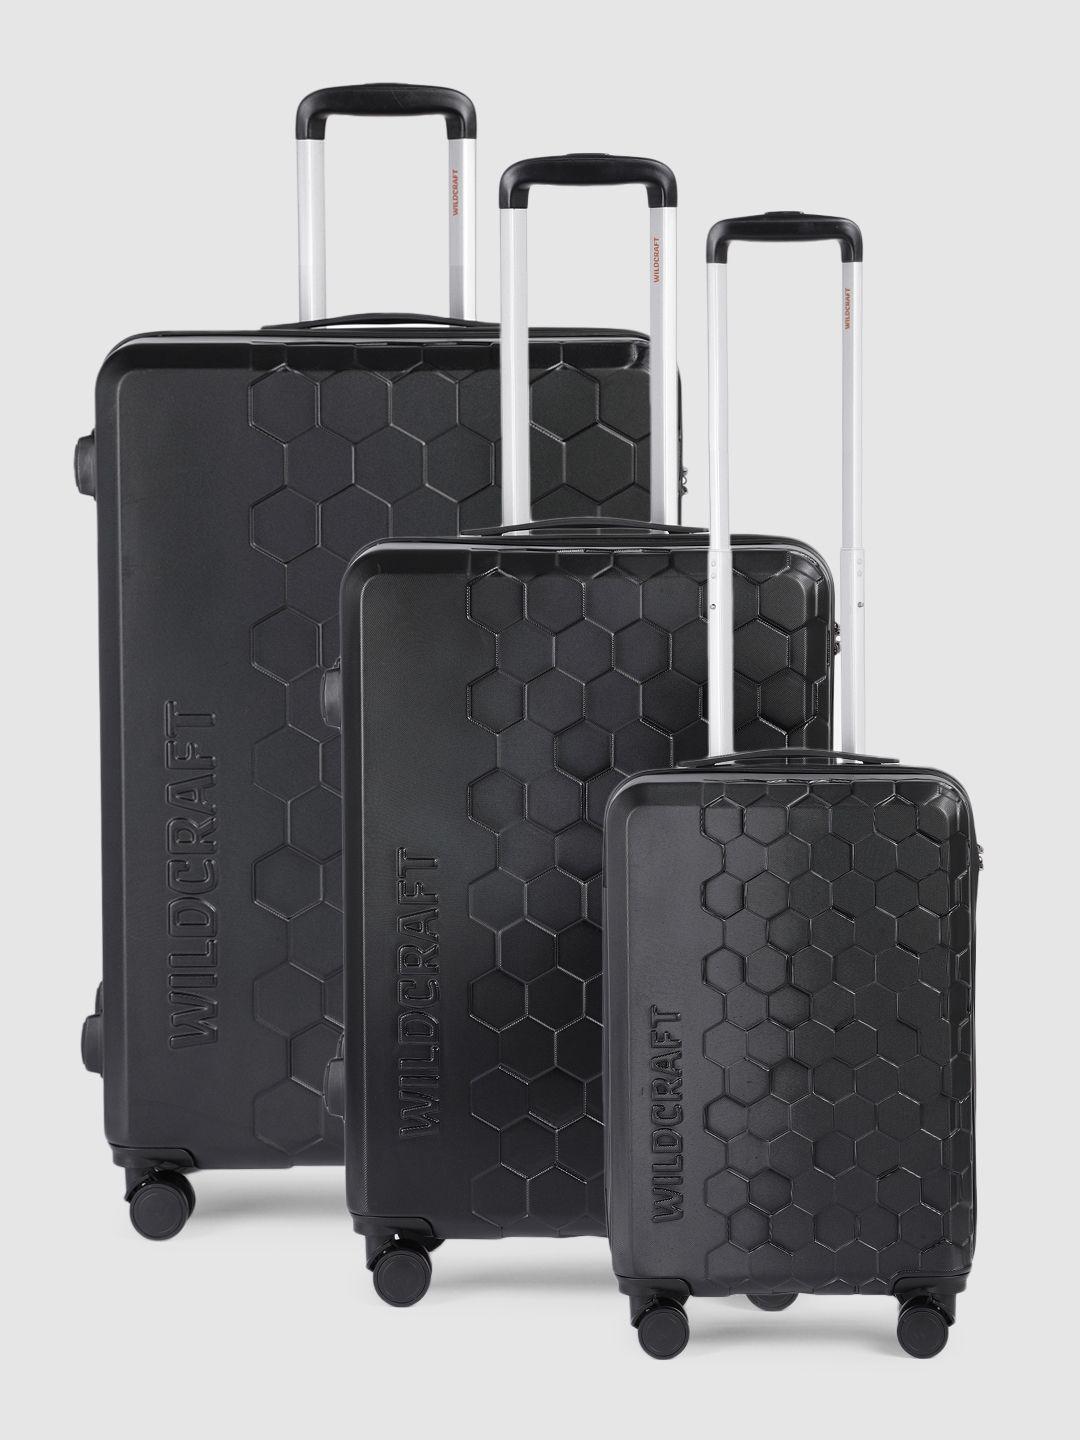 wildcraft pyxis set of 3 trolley suitcases - cabin, medium & large